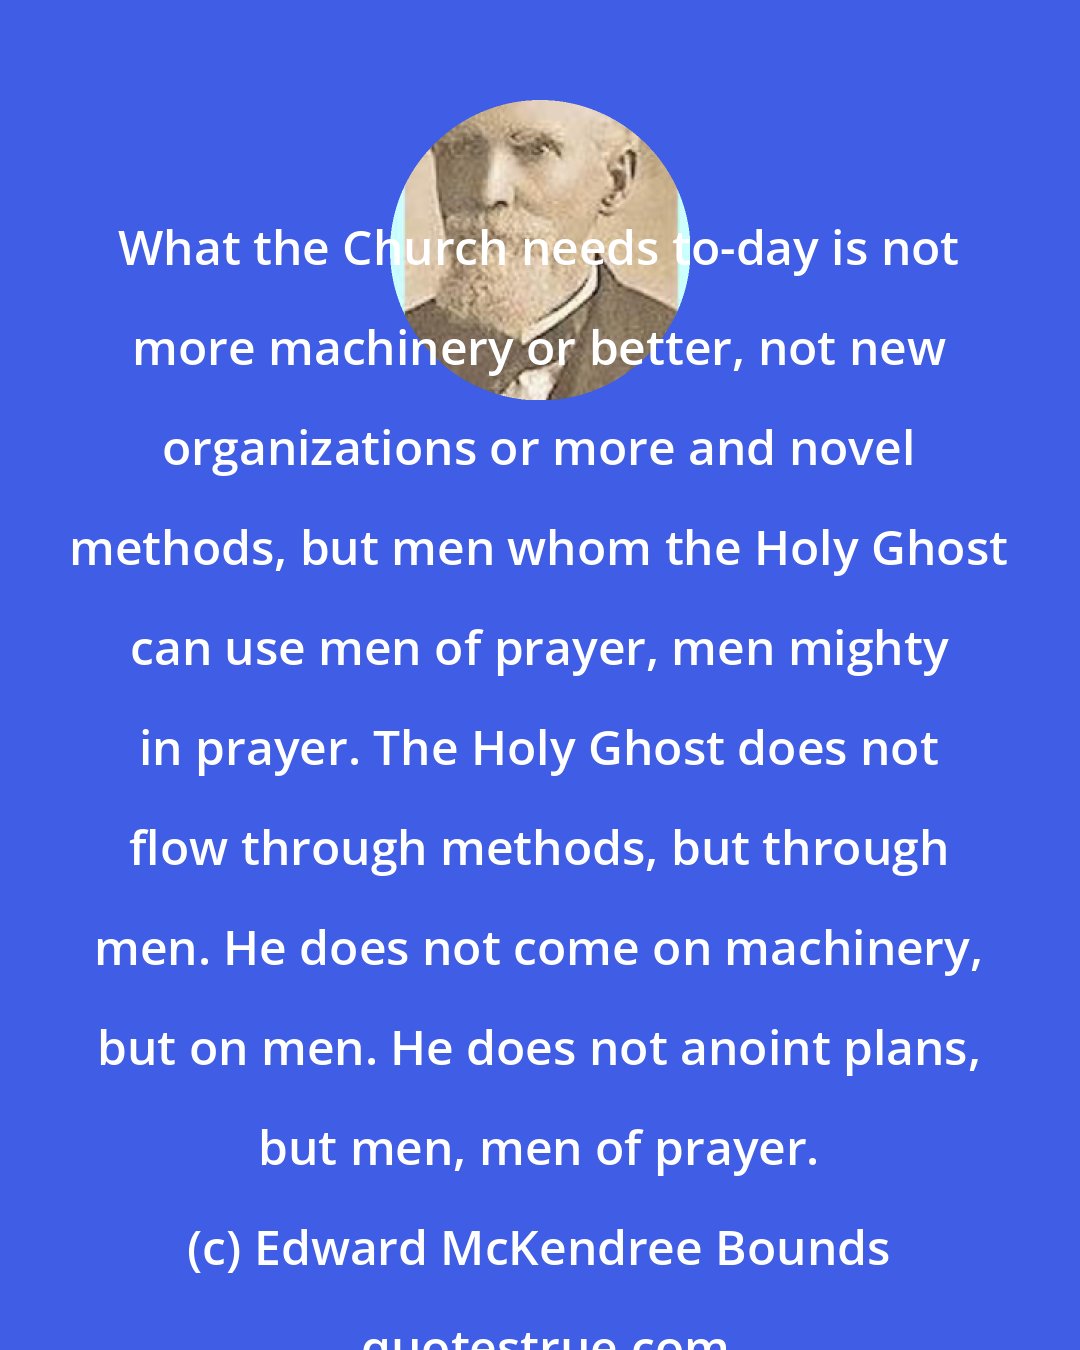 Edward McKendree Bounds: What the Church needs to-day is not more machinery or better, not new organizations or more and novel methods, but men whom the Holy Ghost can use men of prayer, men mighty in prayer. The Holy Ghost does not flow through methods, but through men. He does not come on machinery, but on men. He does not anoint plans, but men, men of prayer.